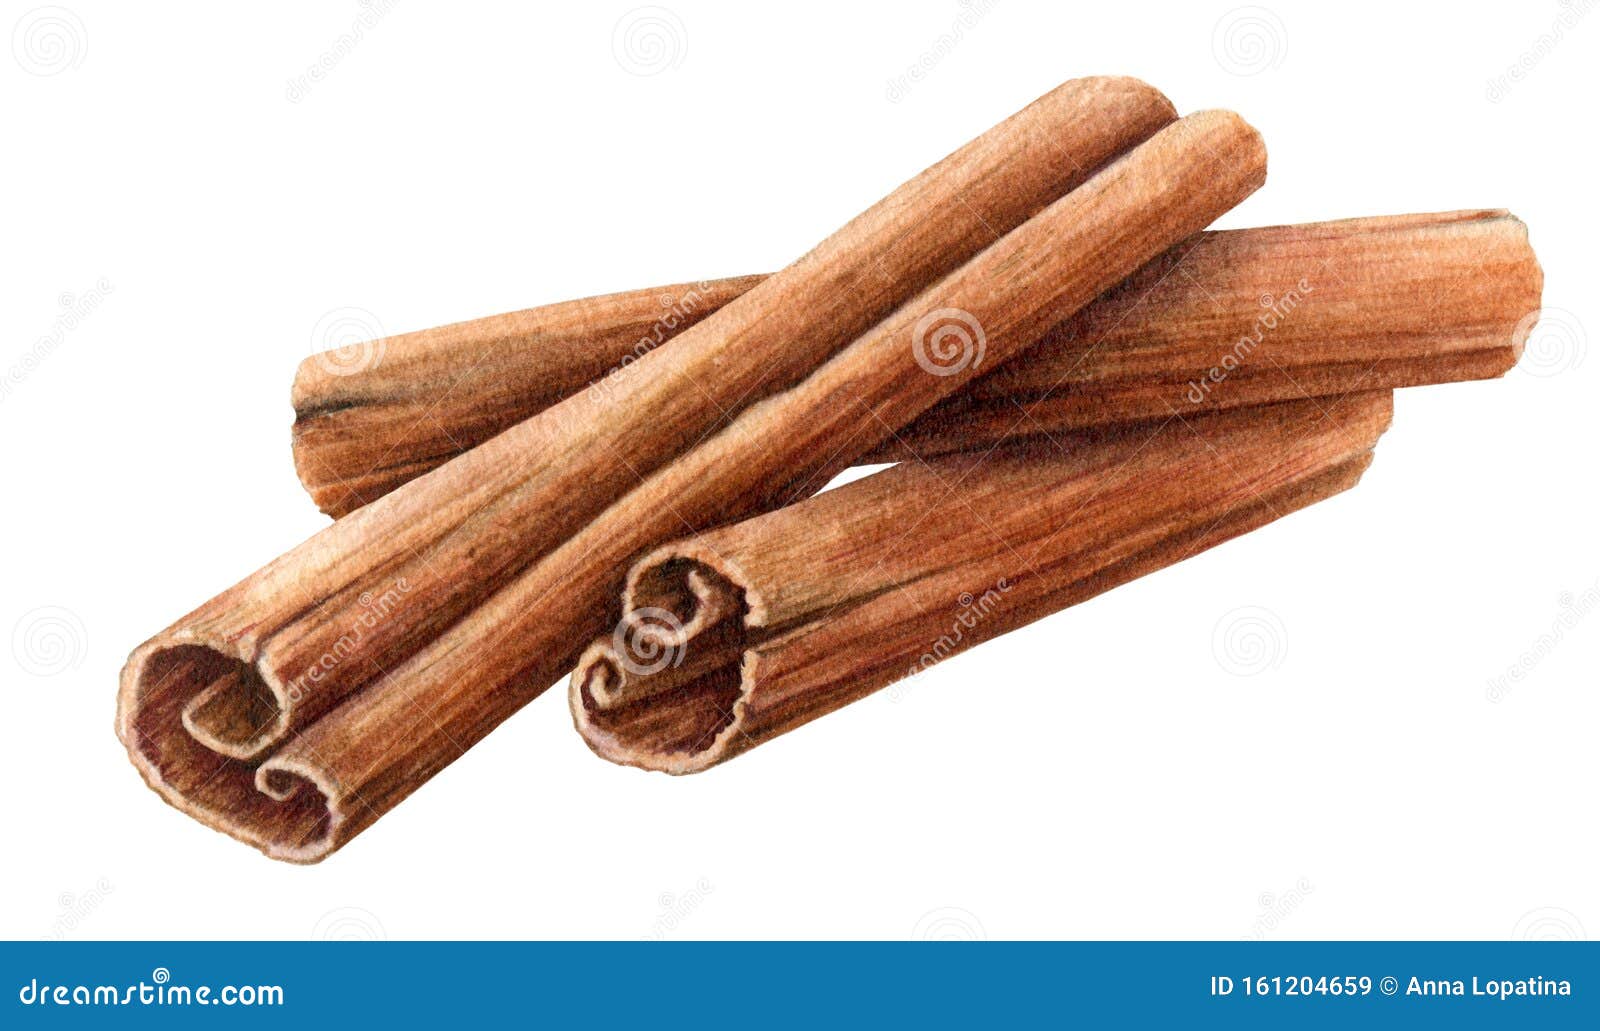 CINNAMON STICKS SPICE KITCHEN SPICES DRAWING PAINTING ART PRINT ON REAL CANVAS 